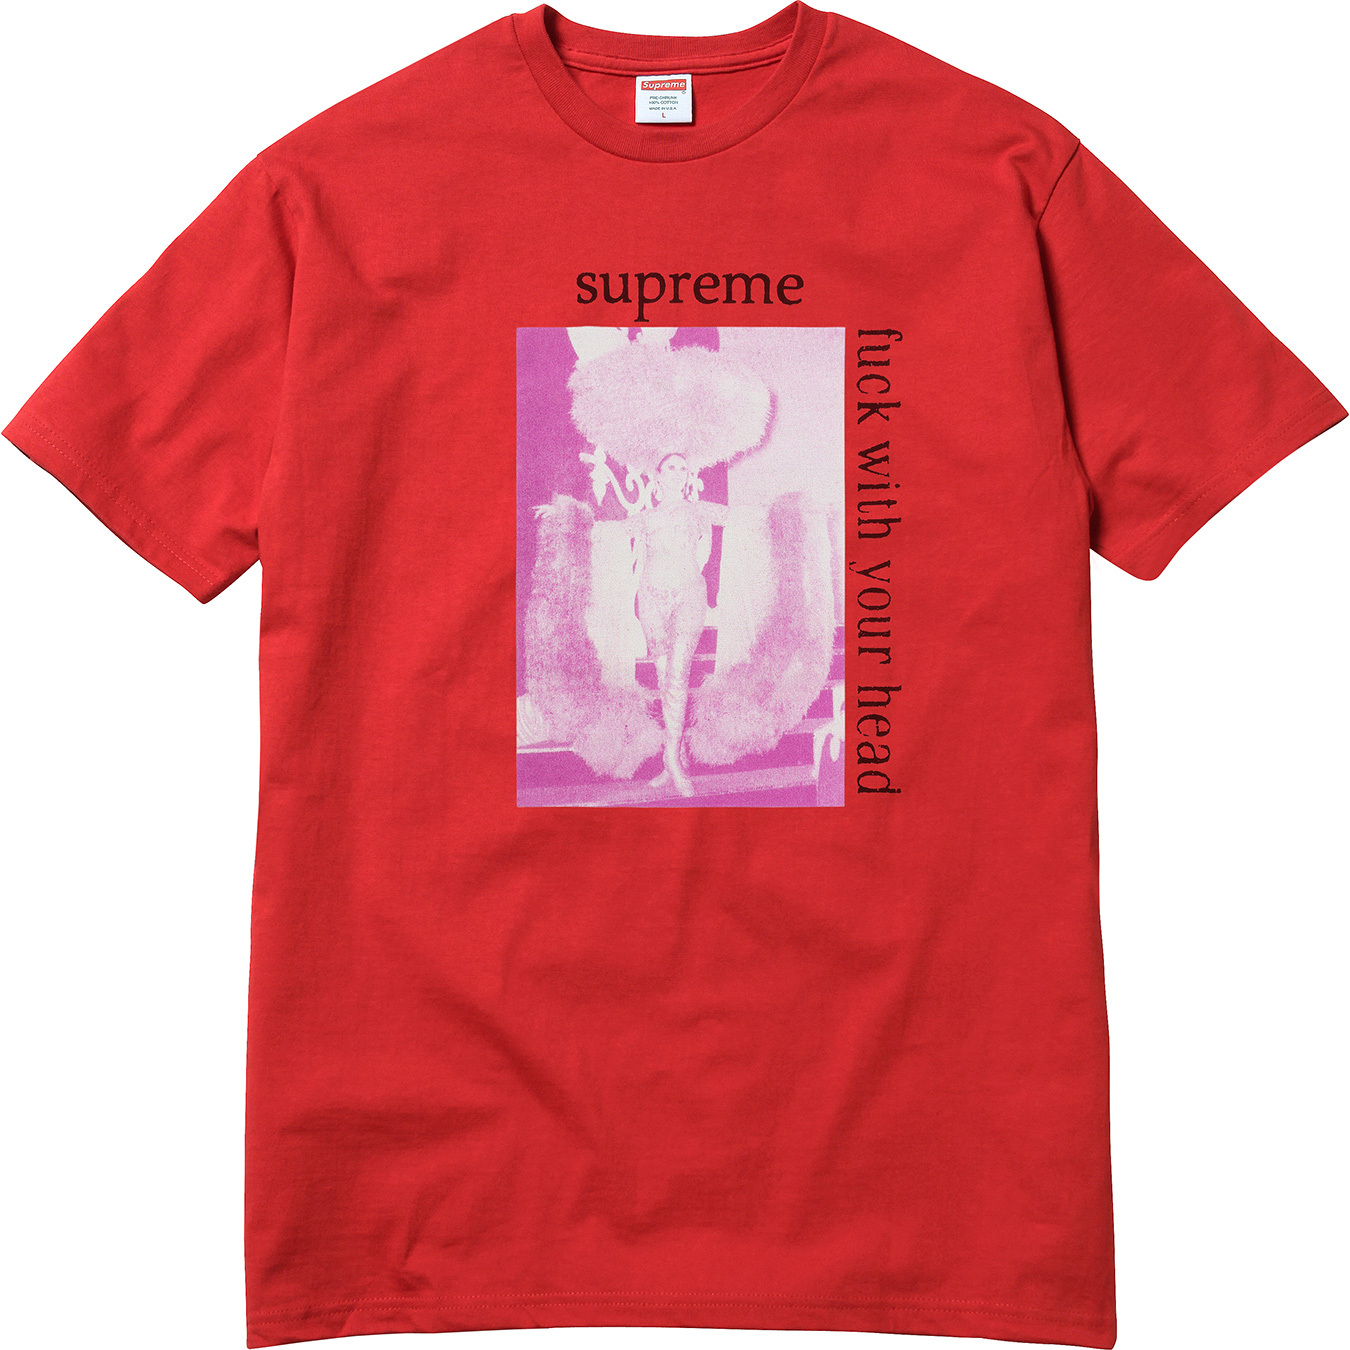 Fuck With Your Head Tee - Supreme Community